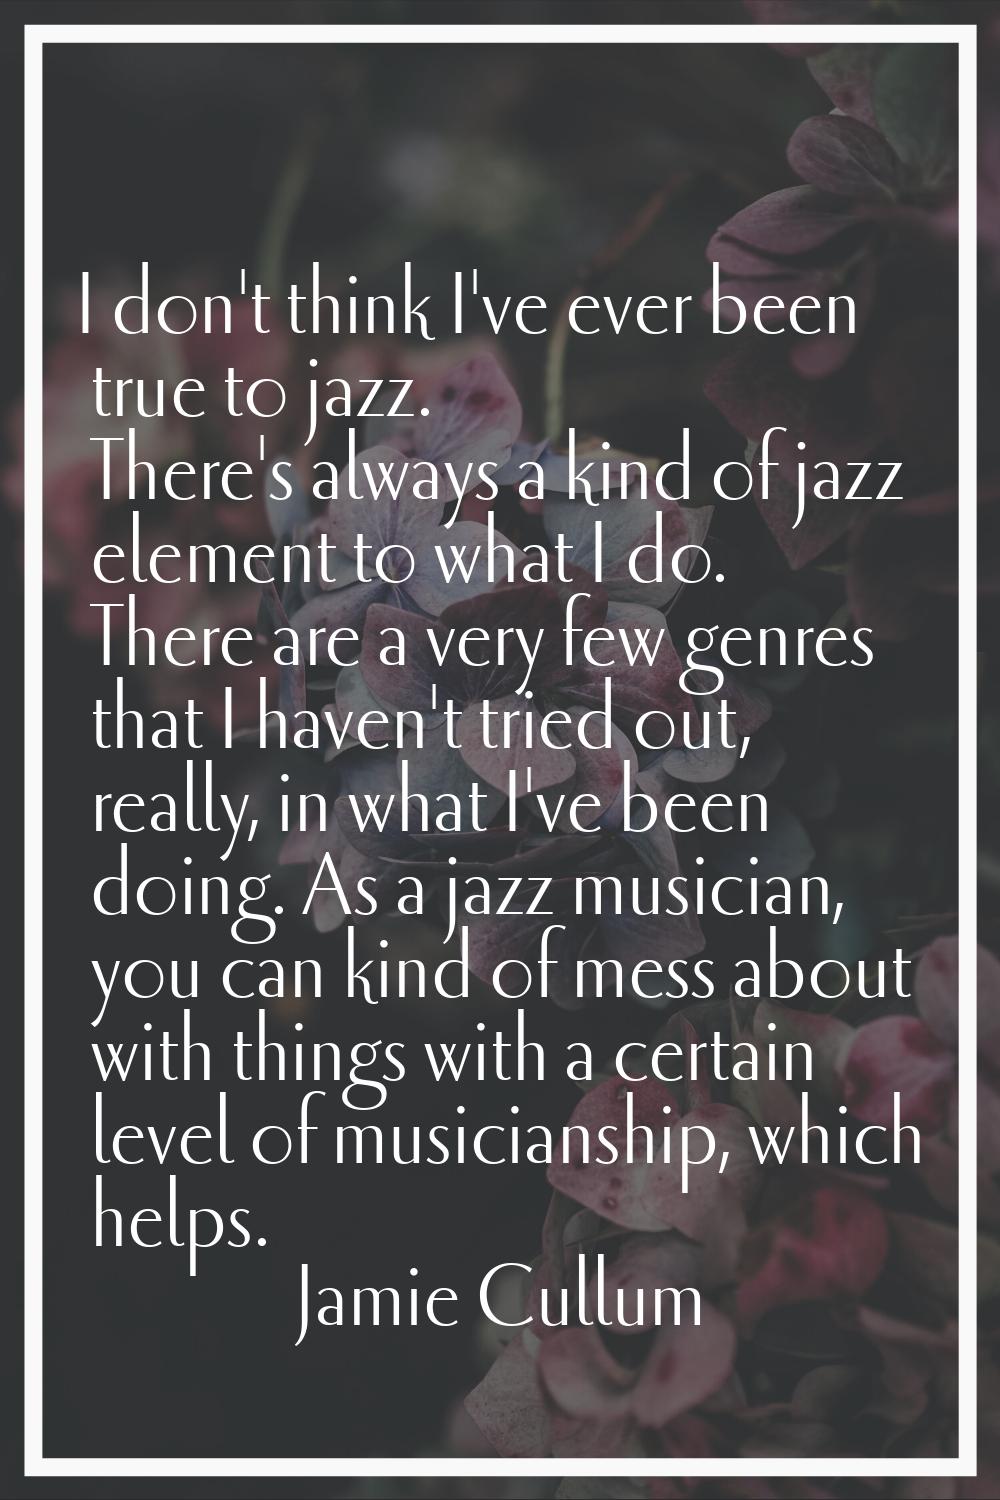 I don't think I've ever been true to jazz. There's always a kind of jazz element to what I do. Ther